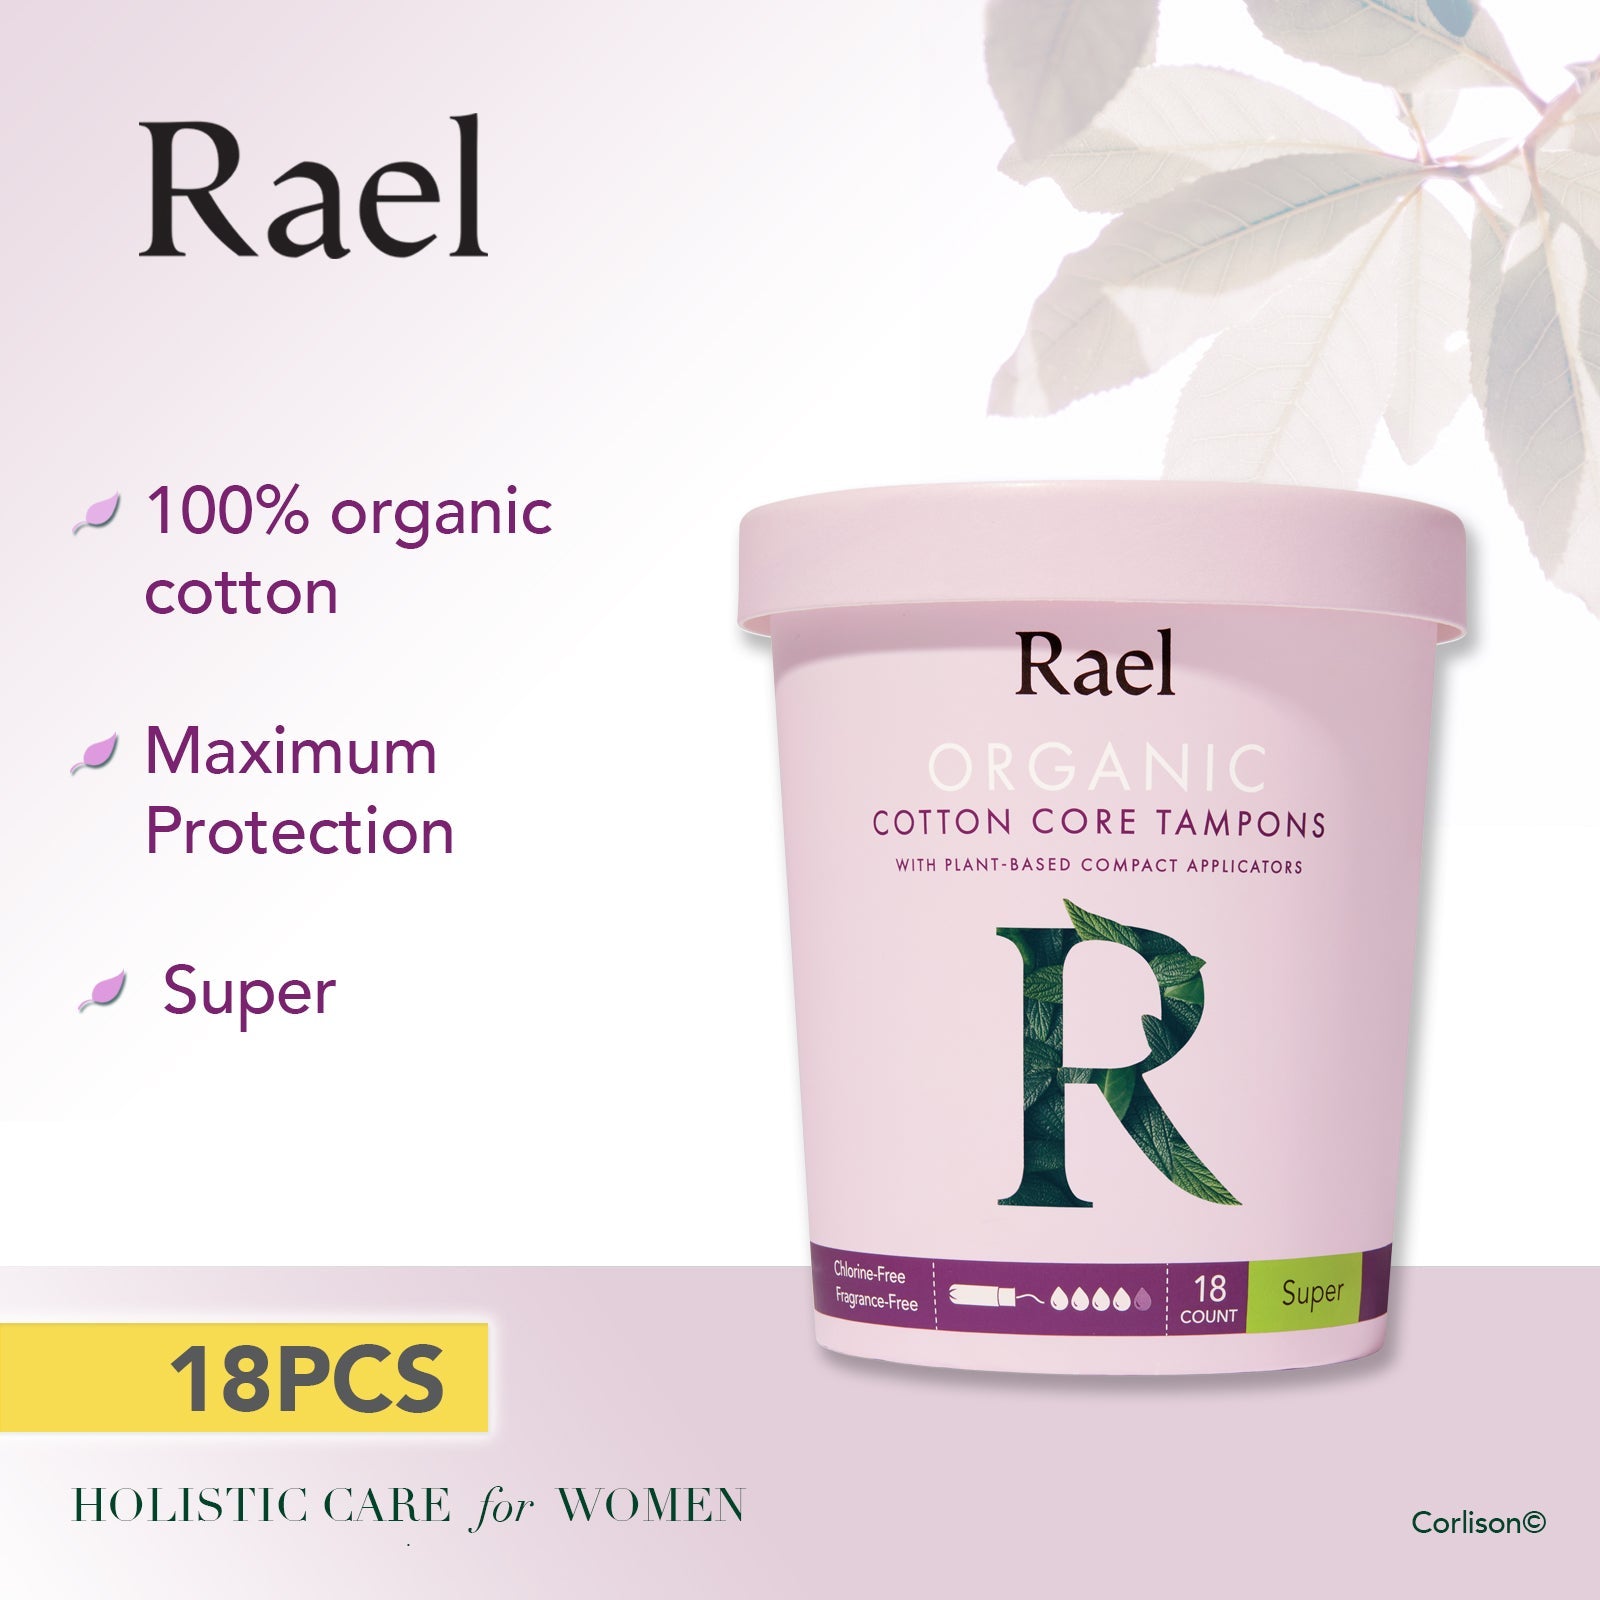 Rael Super Organic Cotton Tampons with Plant-based Compact Applicator 18s